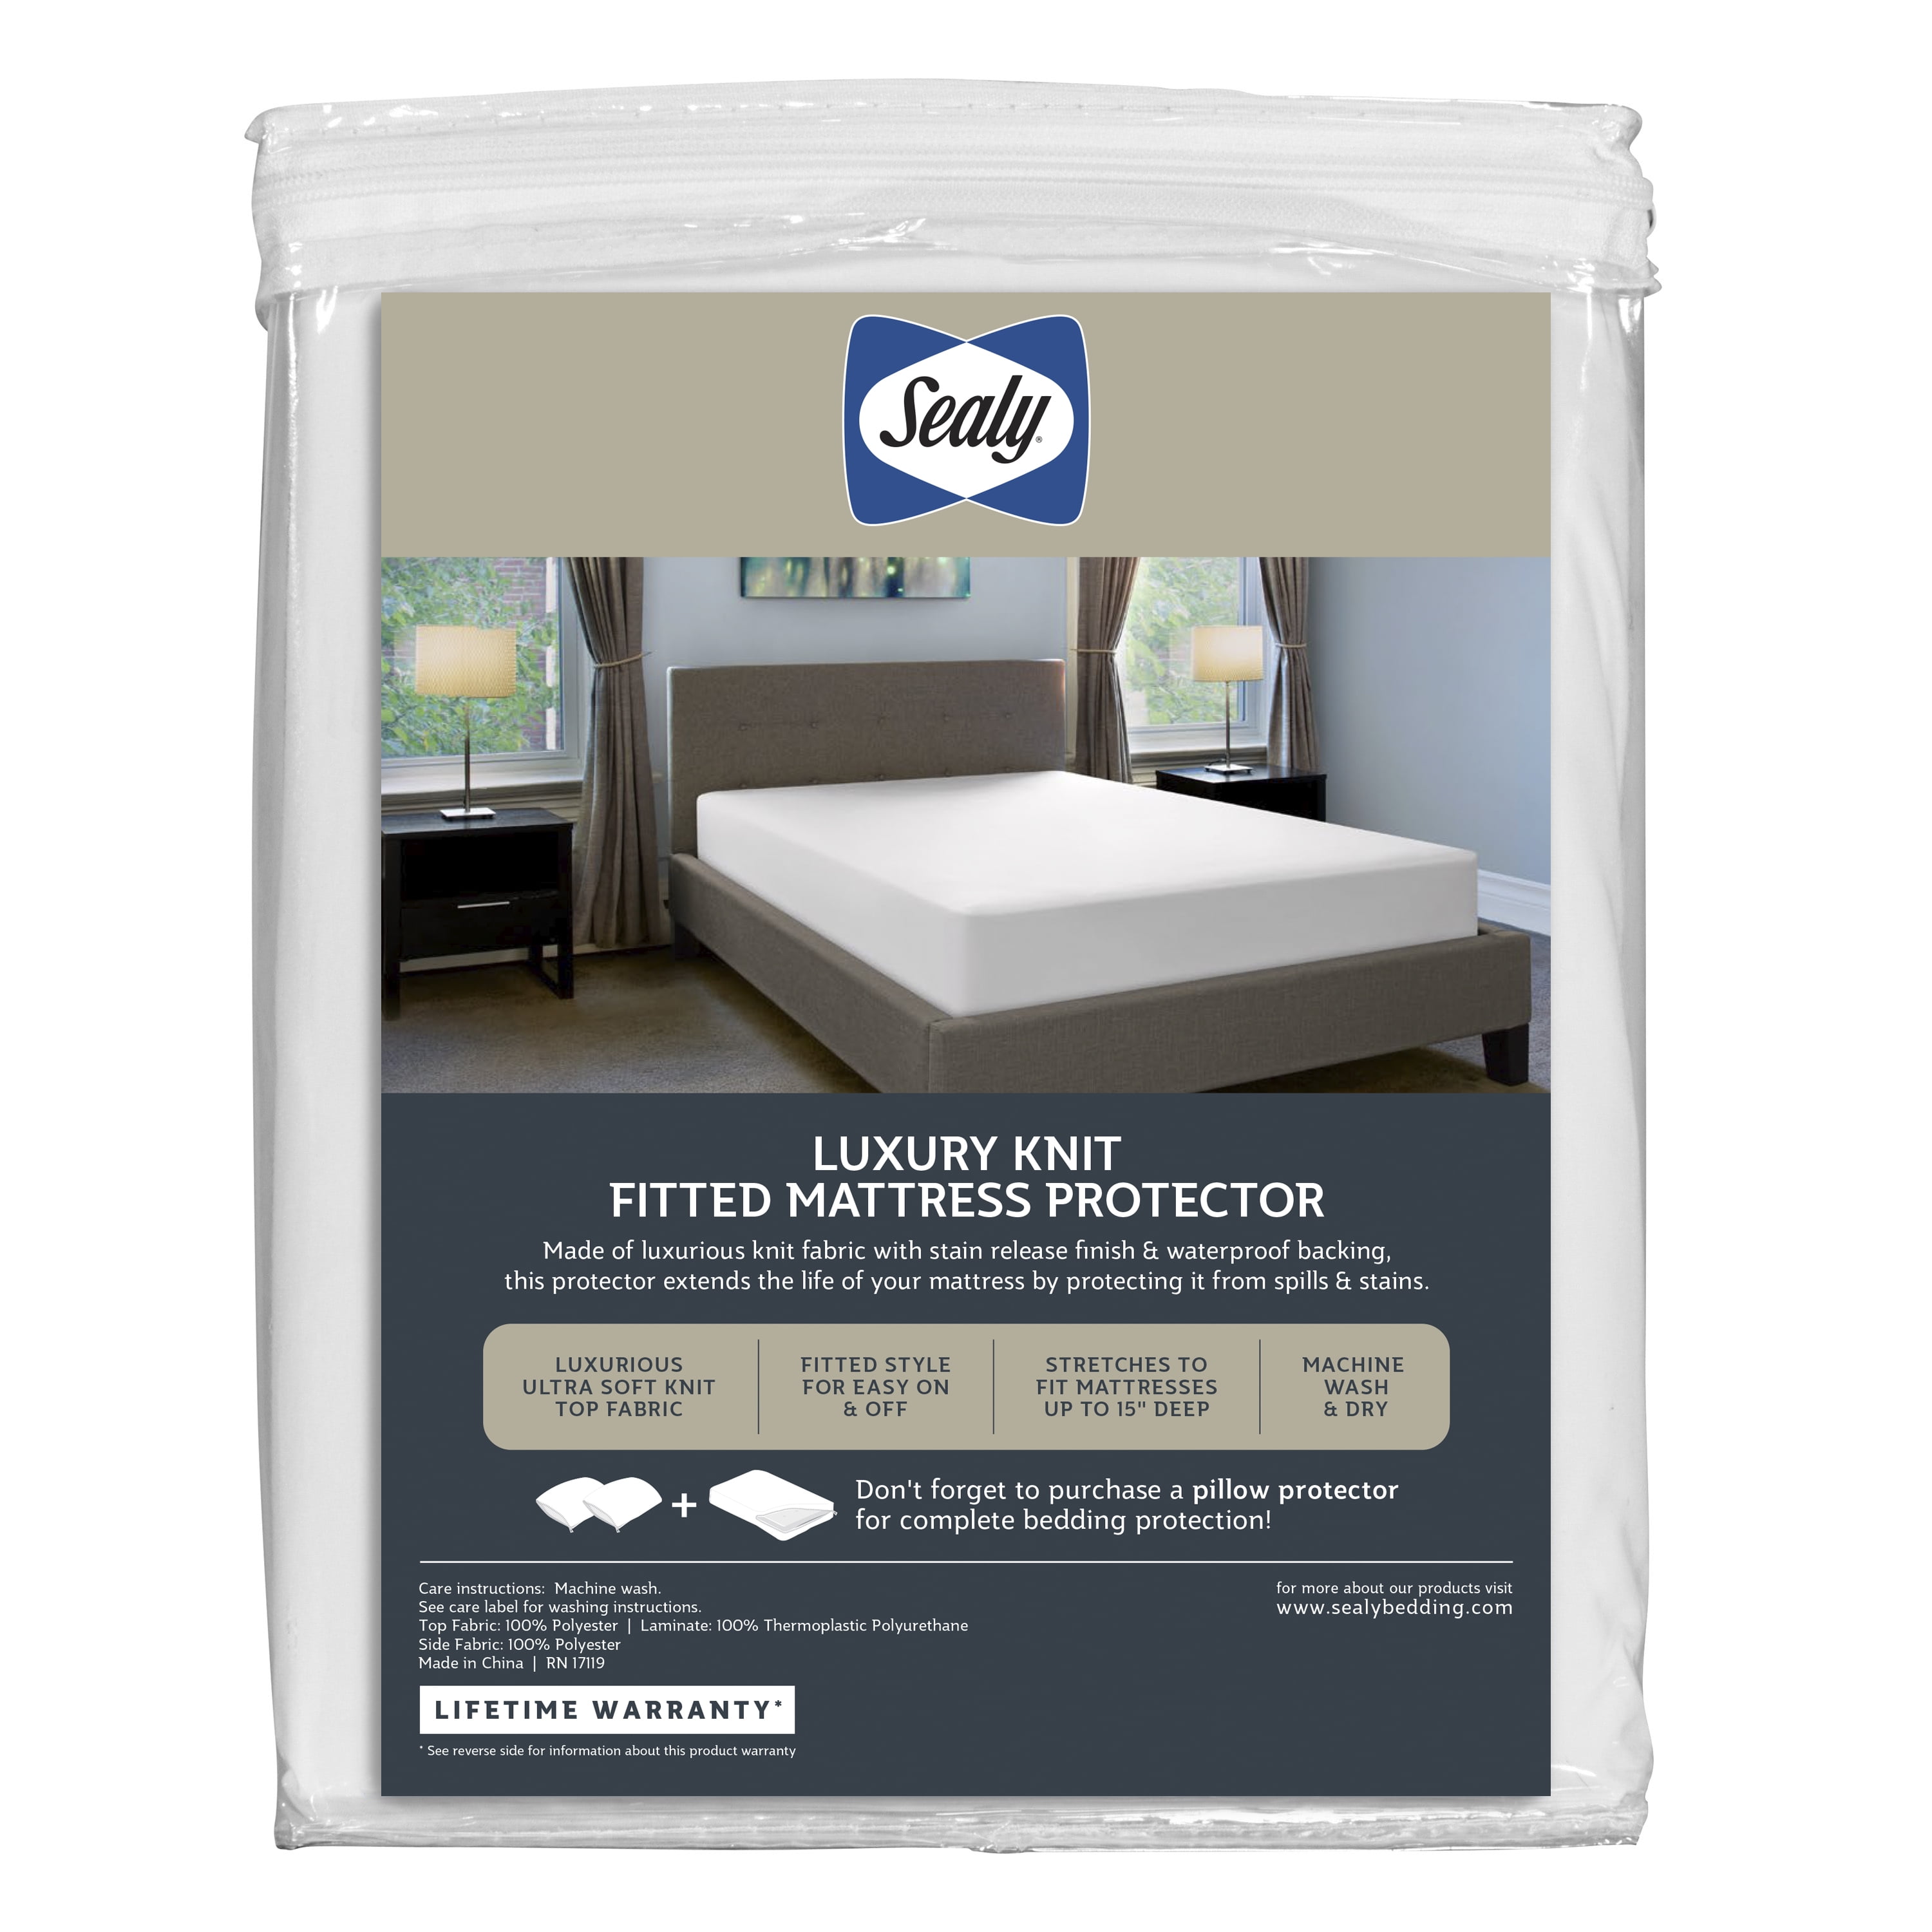 ANTI-ALLERGY TREATED LUXURY QUILTED FITTED MATTRESS BED PROTECTOR COVER 